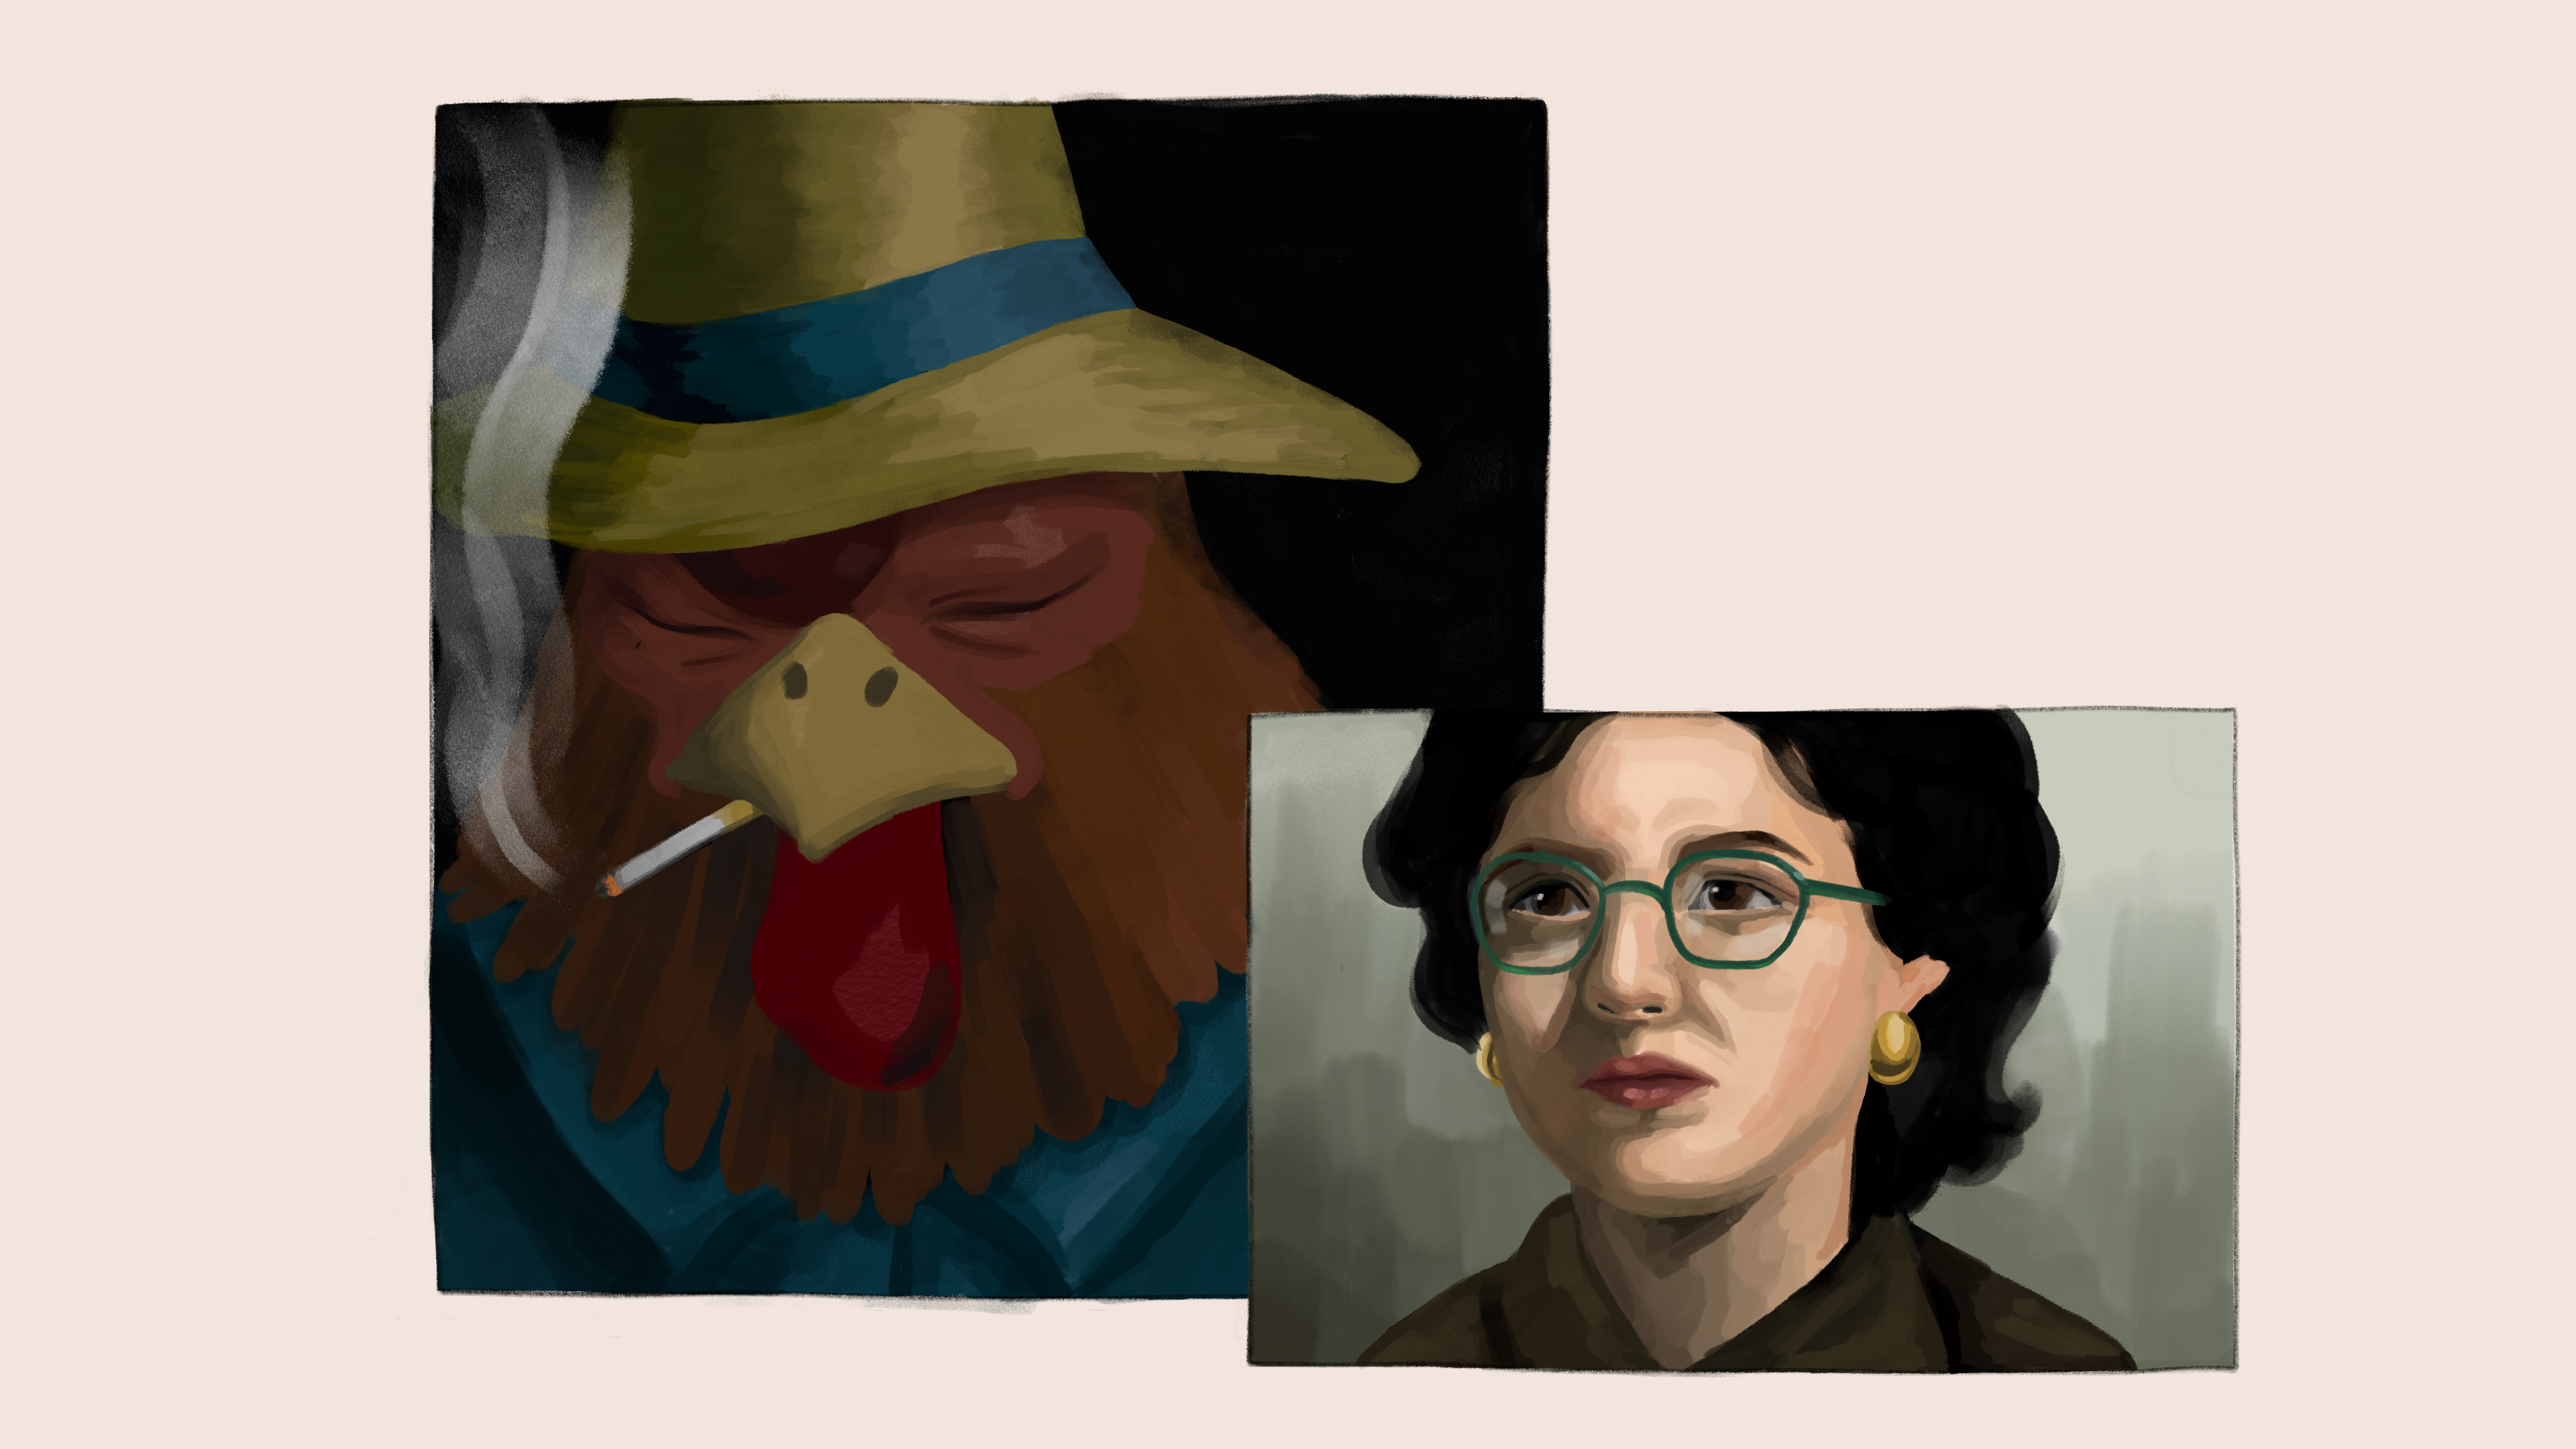 Painting with two square images, one with a close-up of a rooster wearing a tan hat, ad one with a woman with short dark hair and glasses.